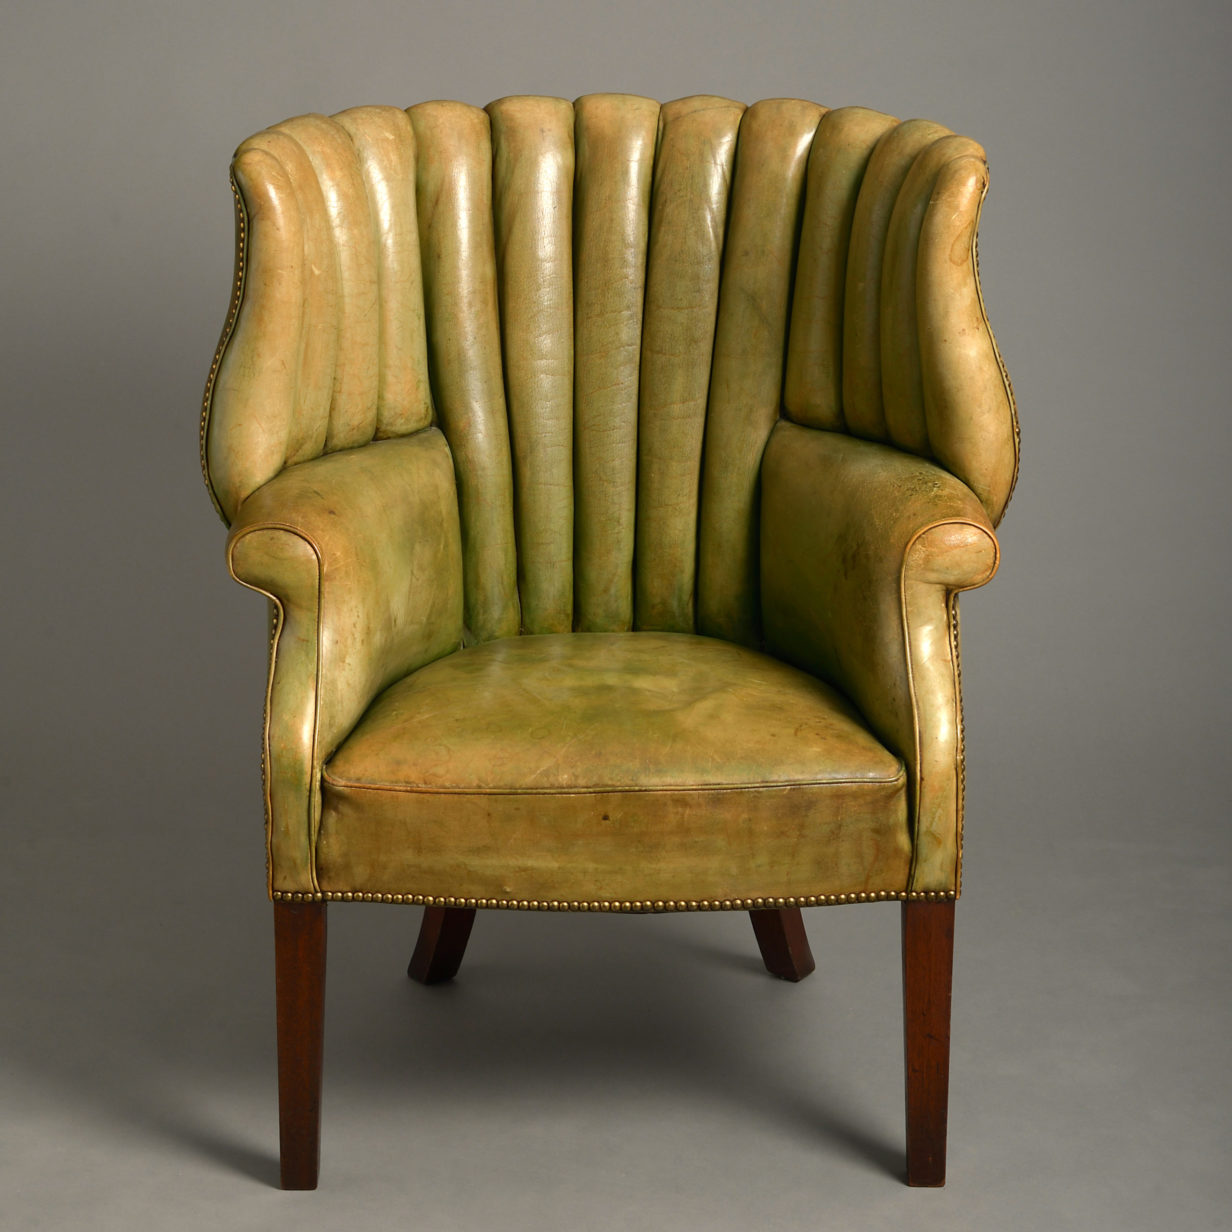 A george iii style leather armchair